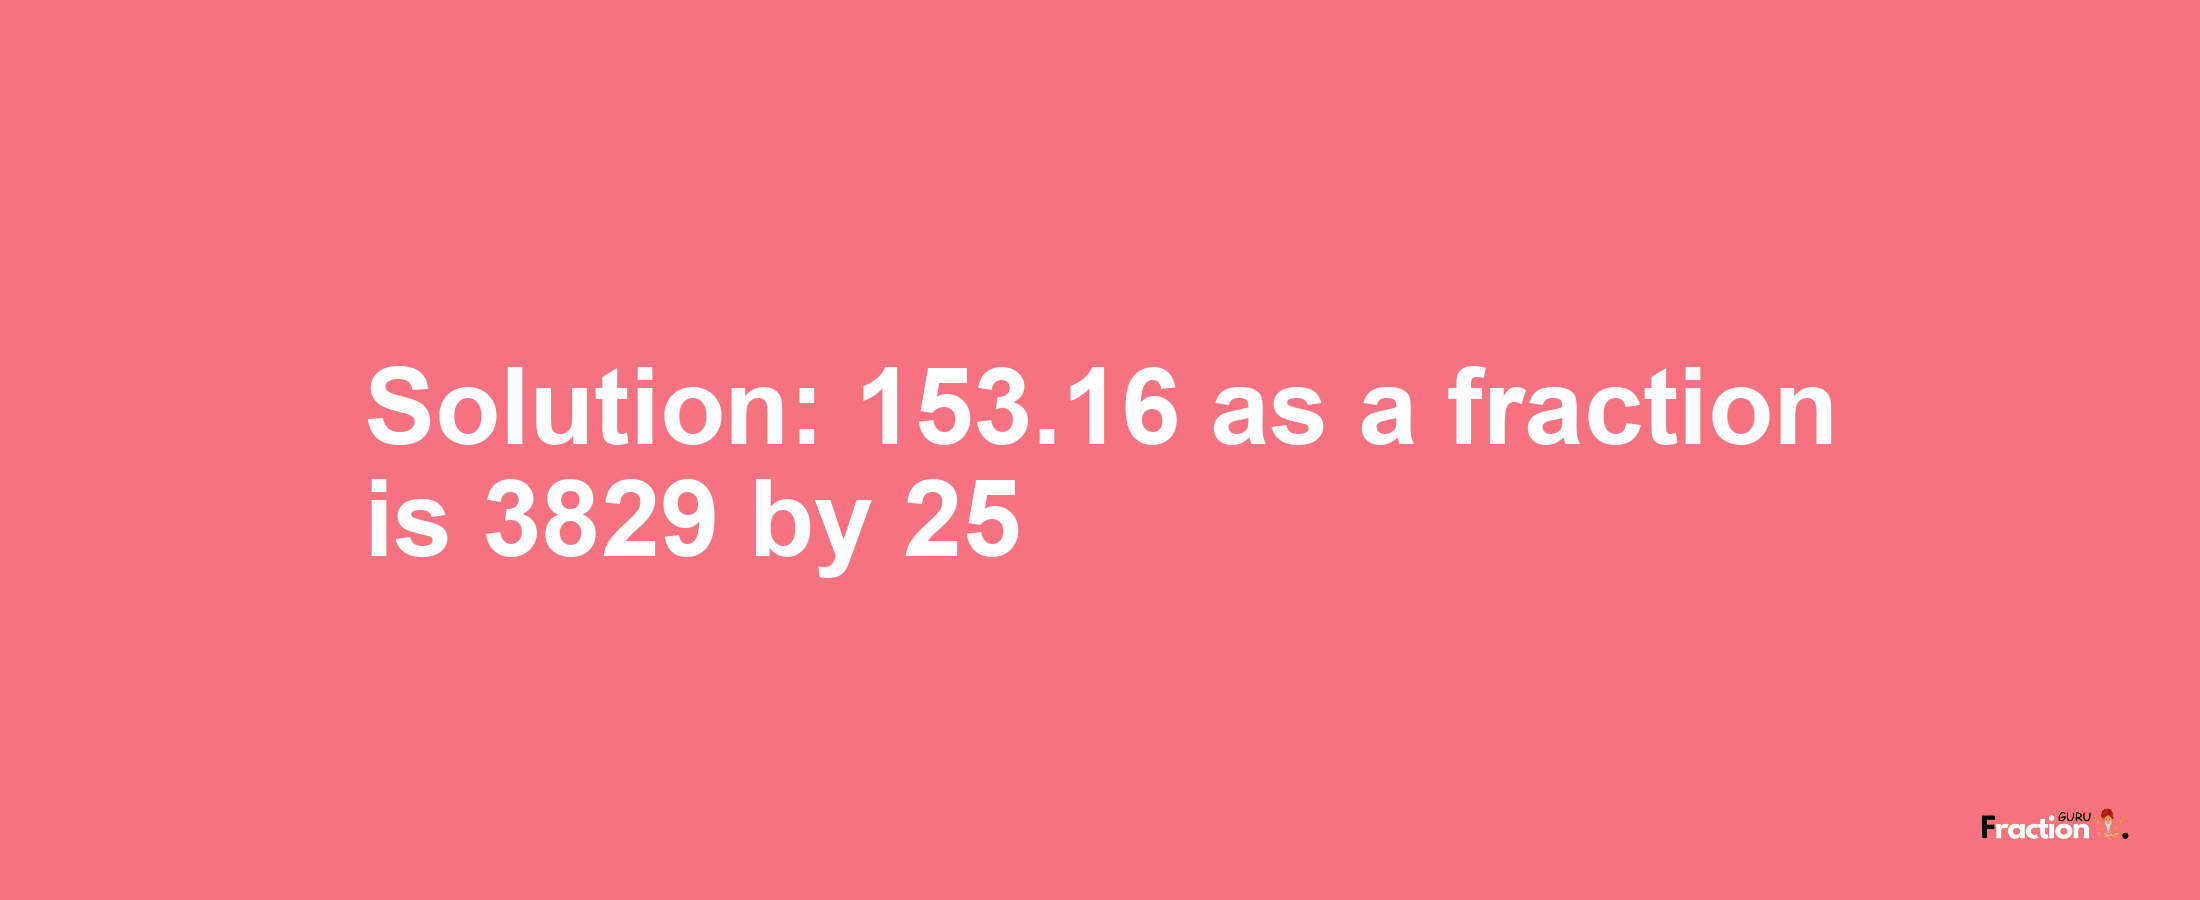 Solution:153.16 as a fraction is 3829/25